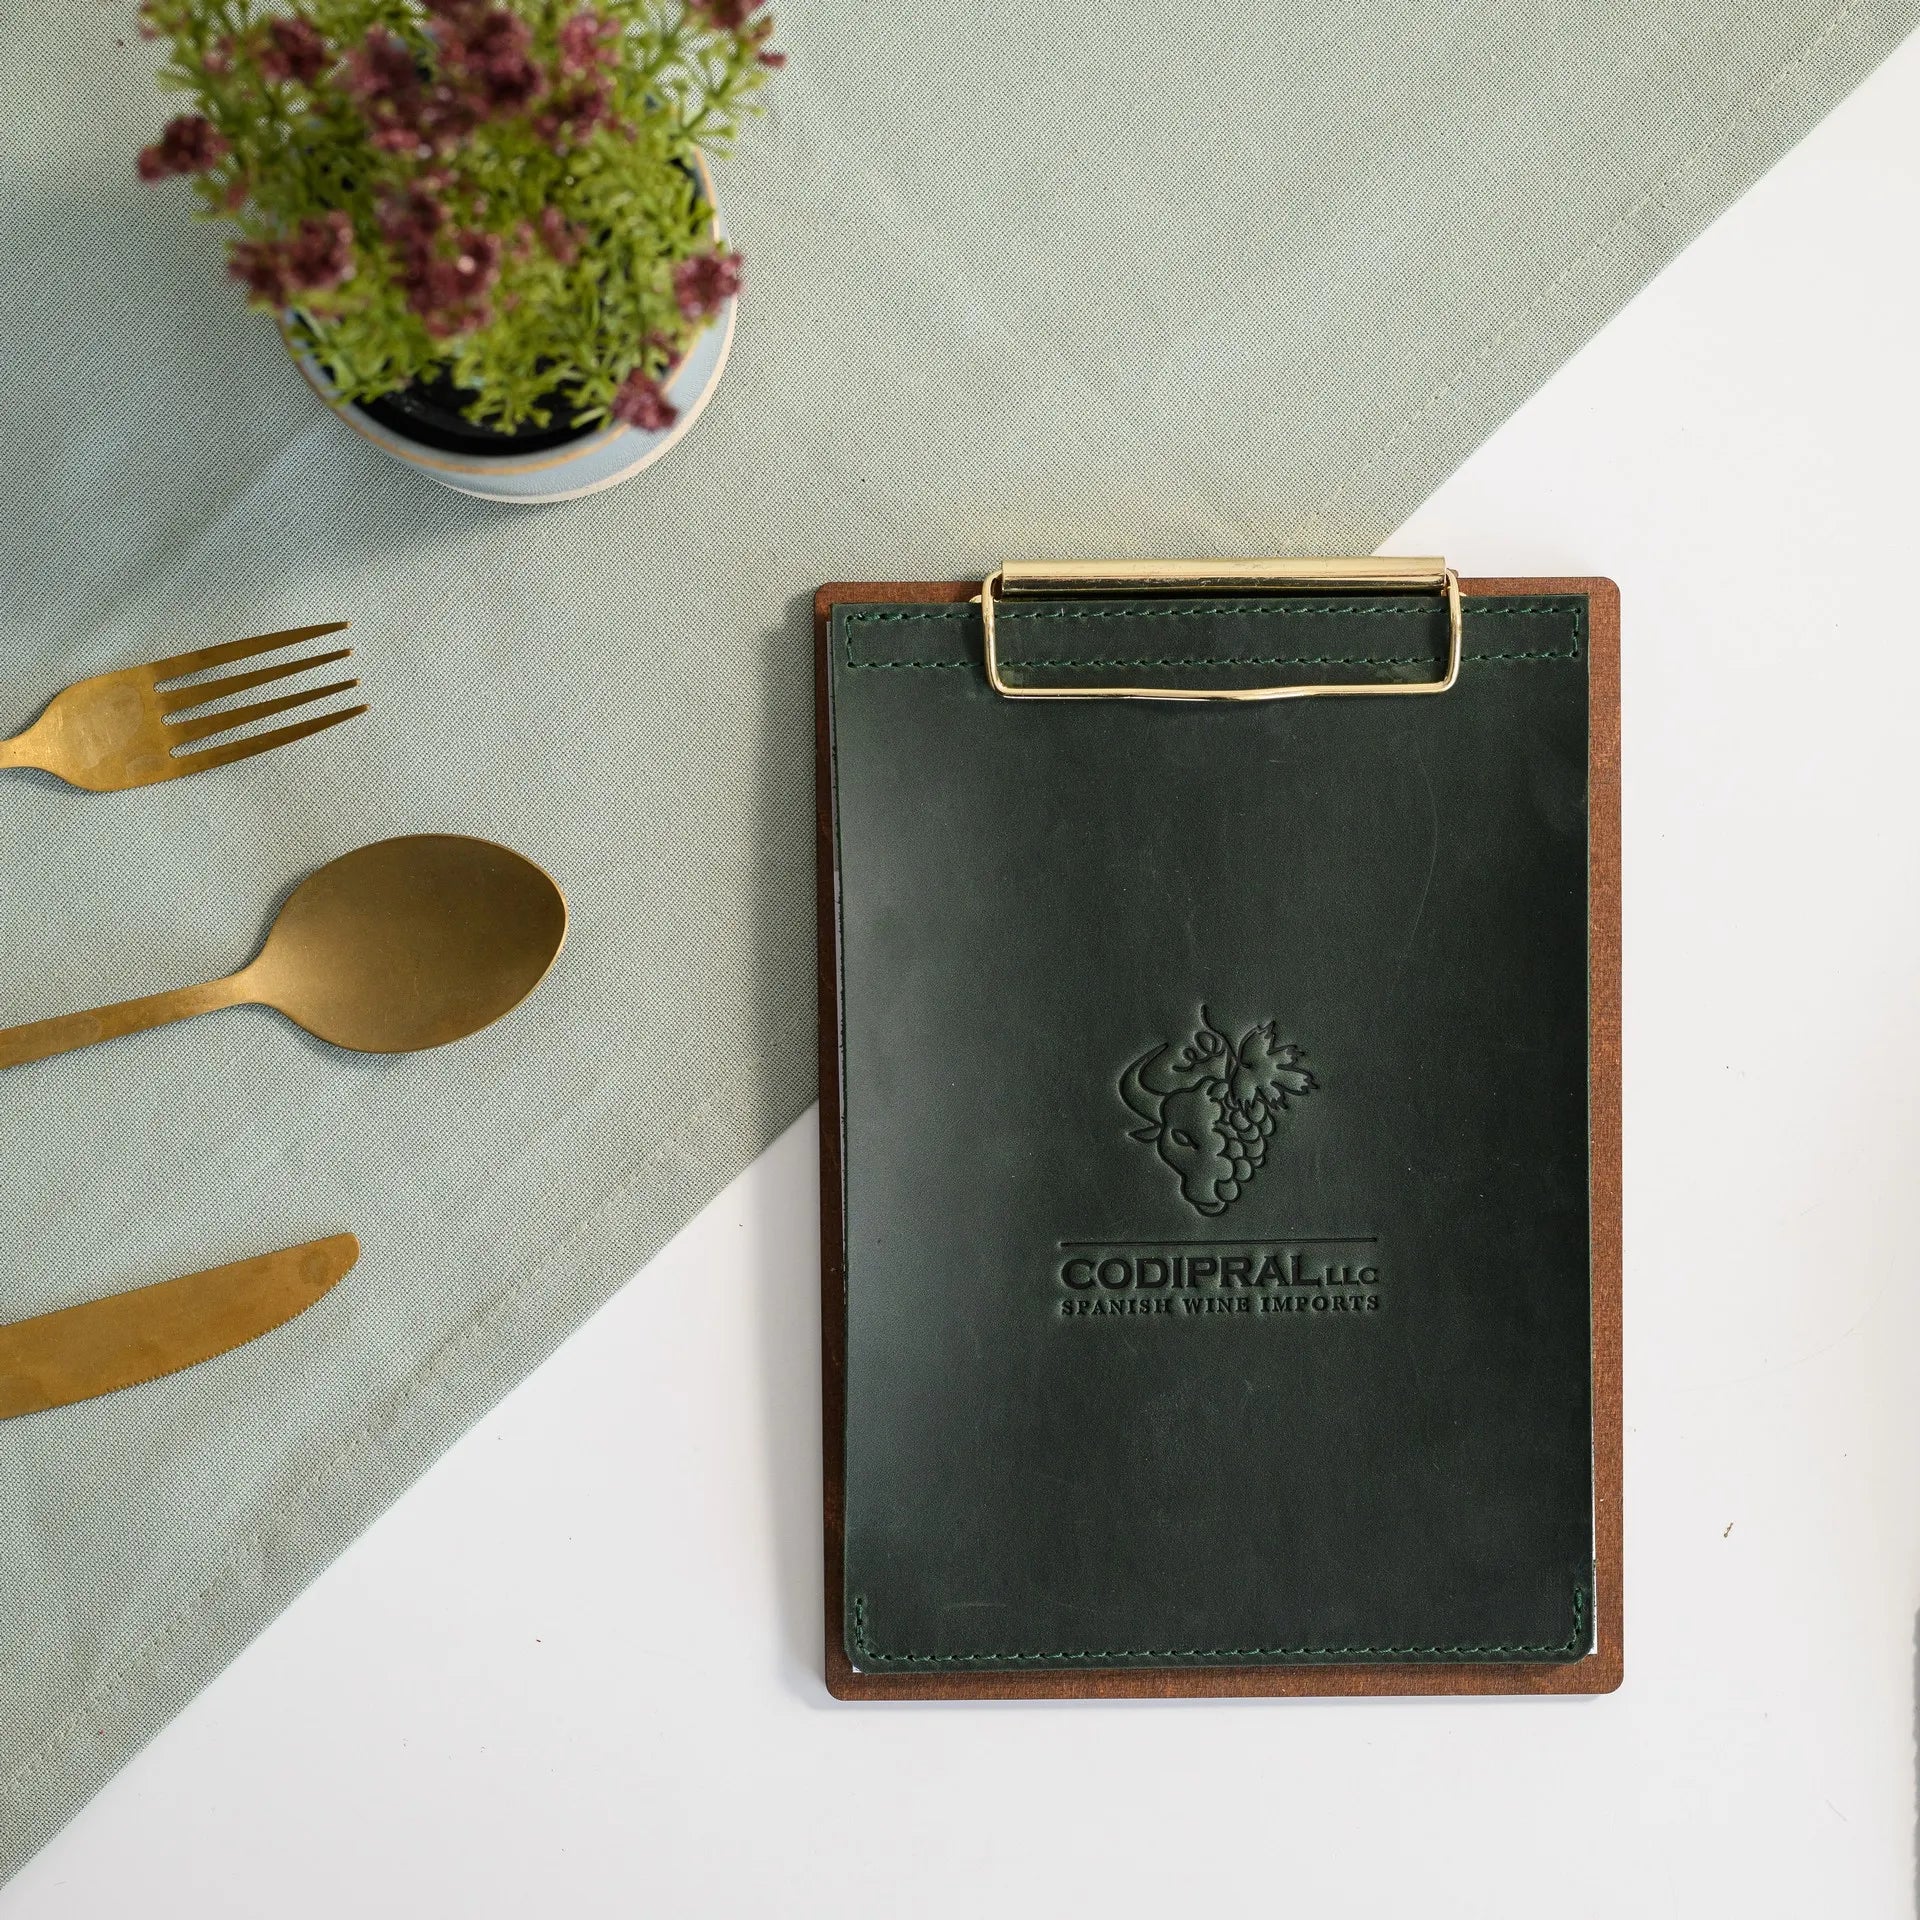 Logo Embossed Menu Board: Add a personalized touch to your restaurant’s menus.